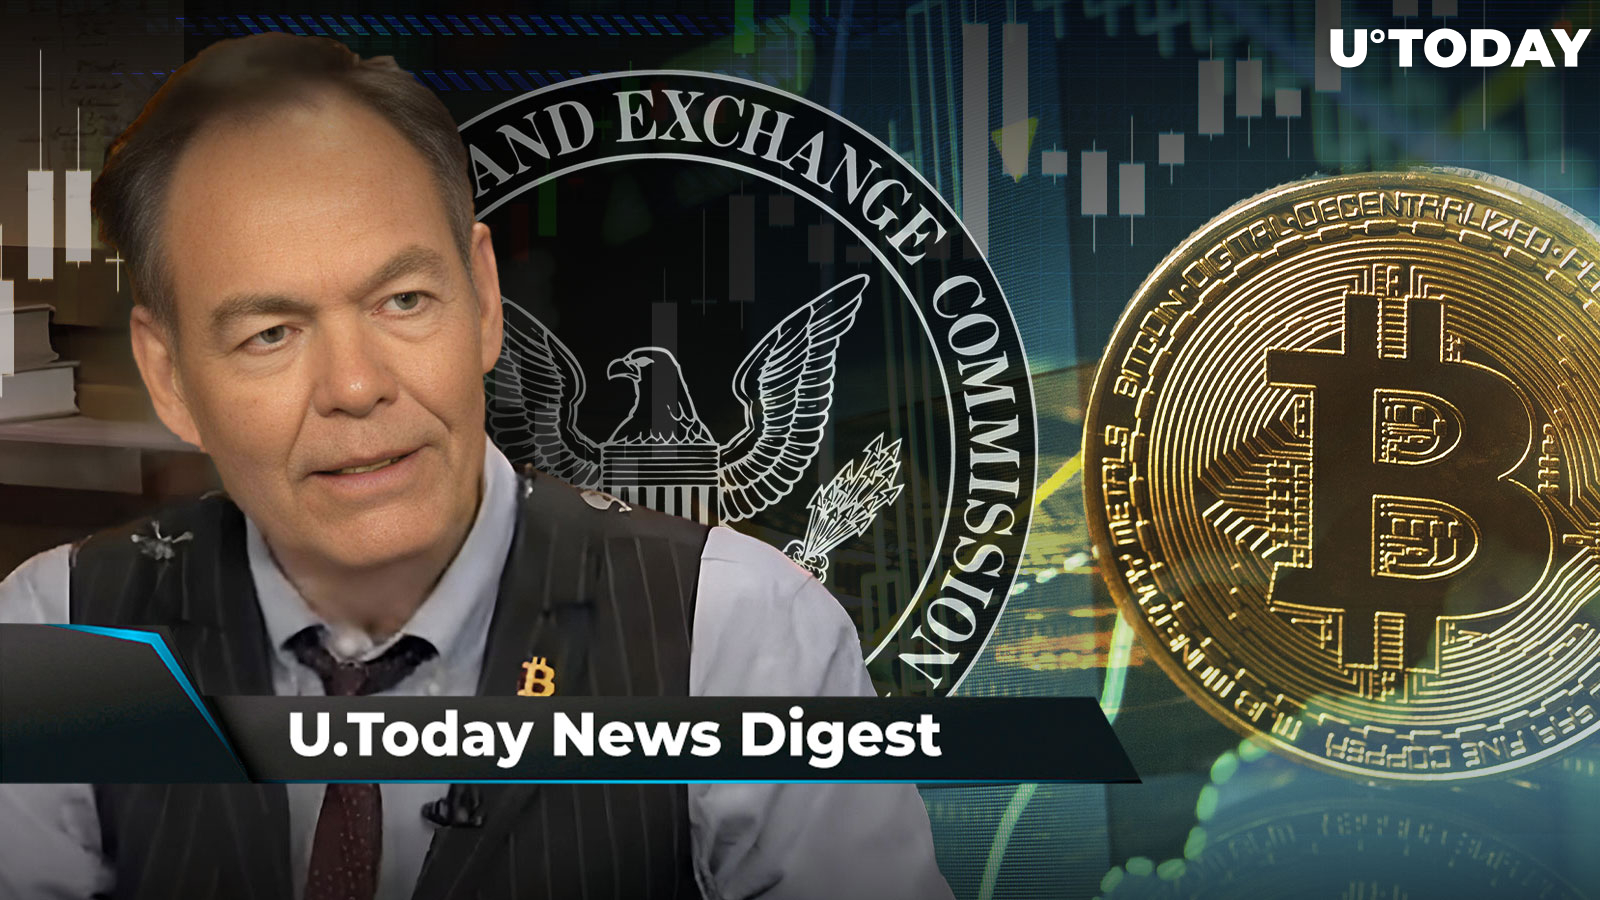 SHIB Rings Alarm Bells; XRP and ETH Will Be Demolished by SEC, Says Max Keiser; BTC Targeting $34,000: Crypto News Digest by U.Today